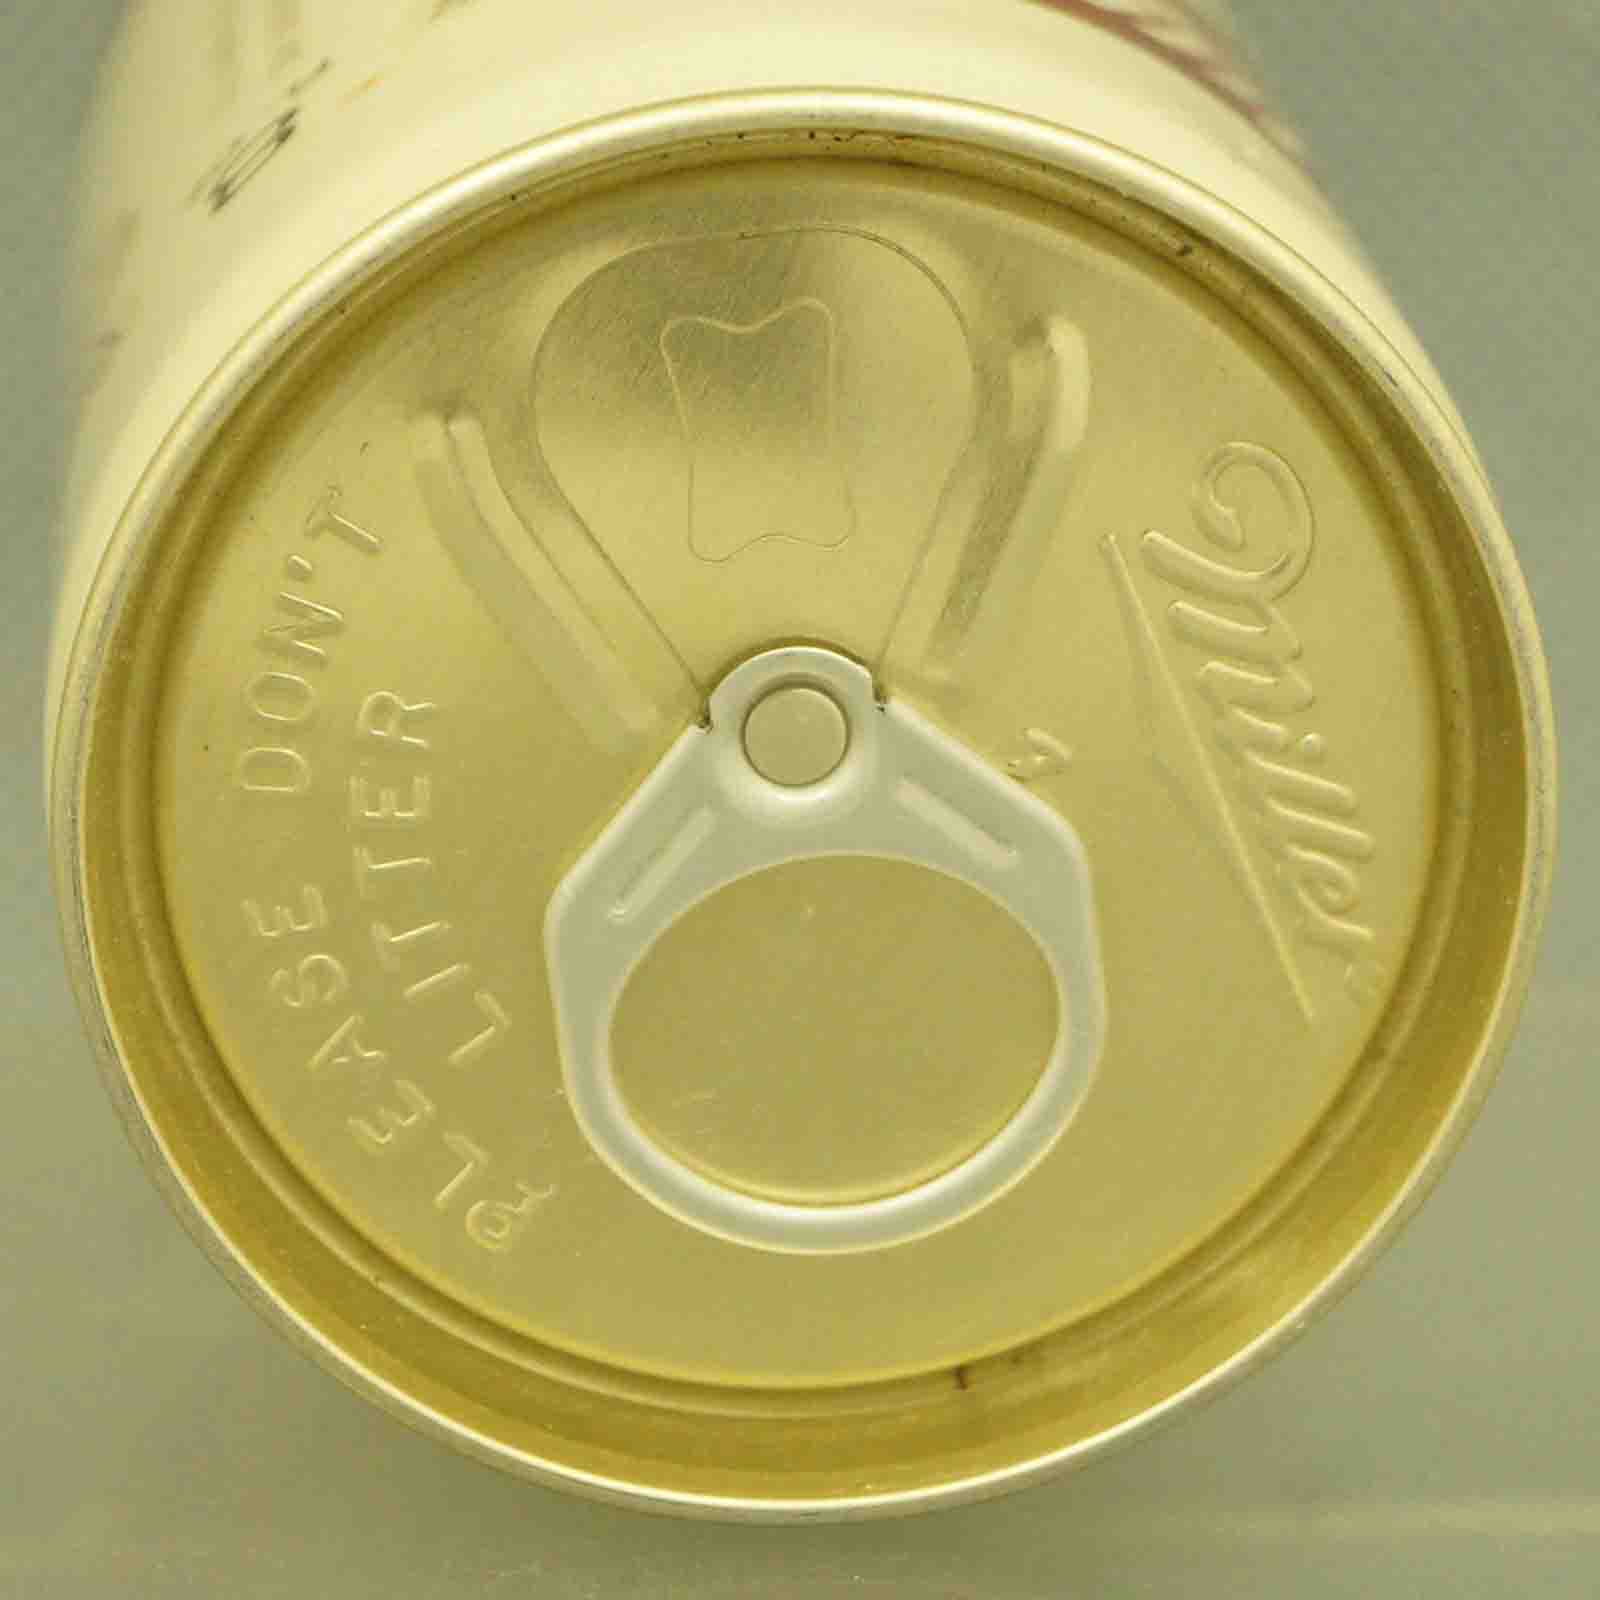 miller 28-36 pull tab beer can 5